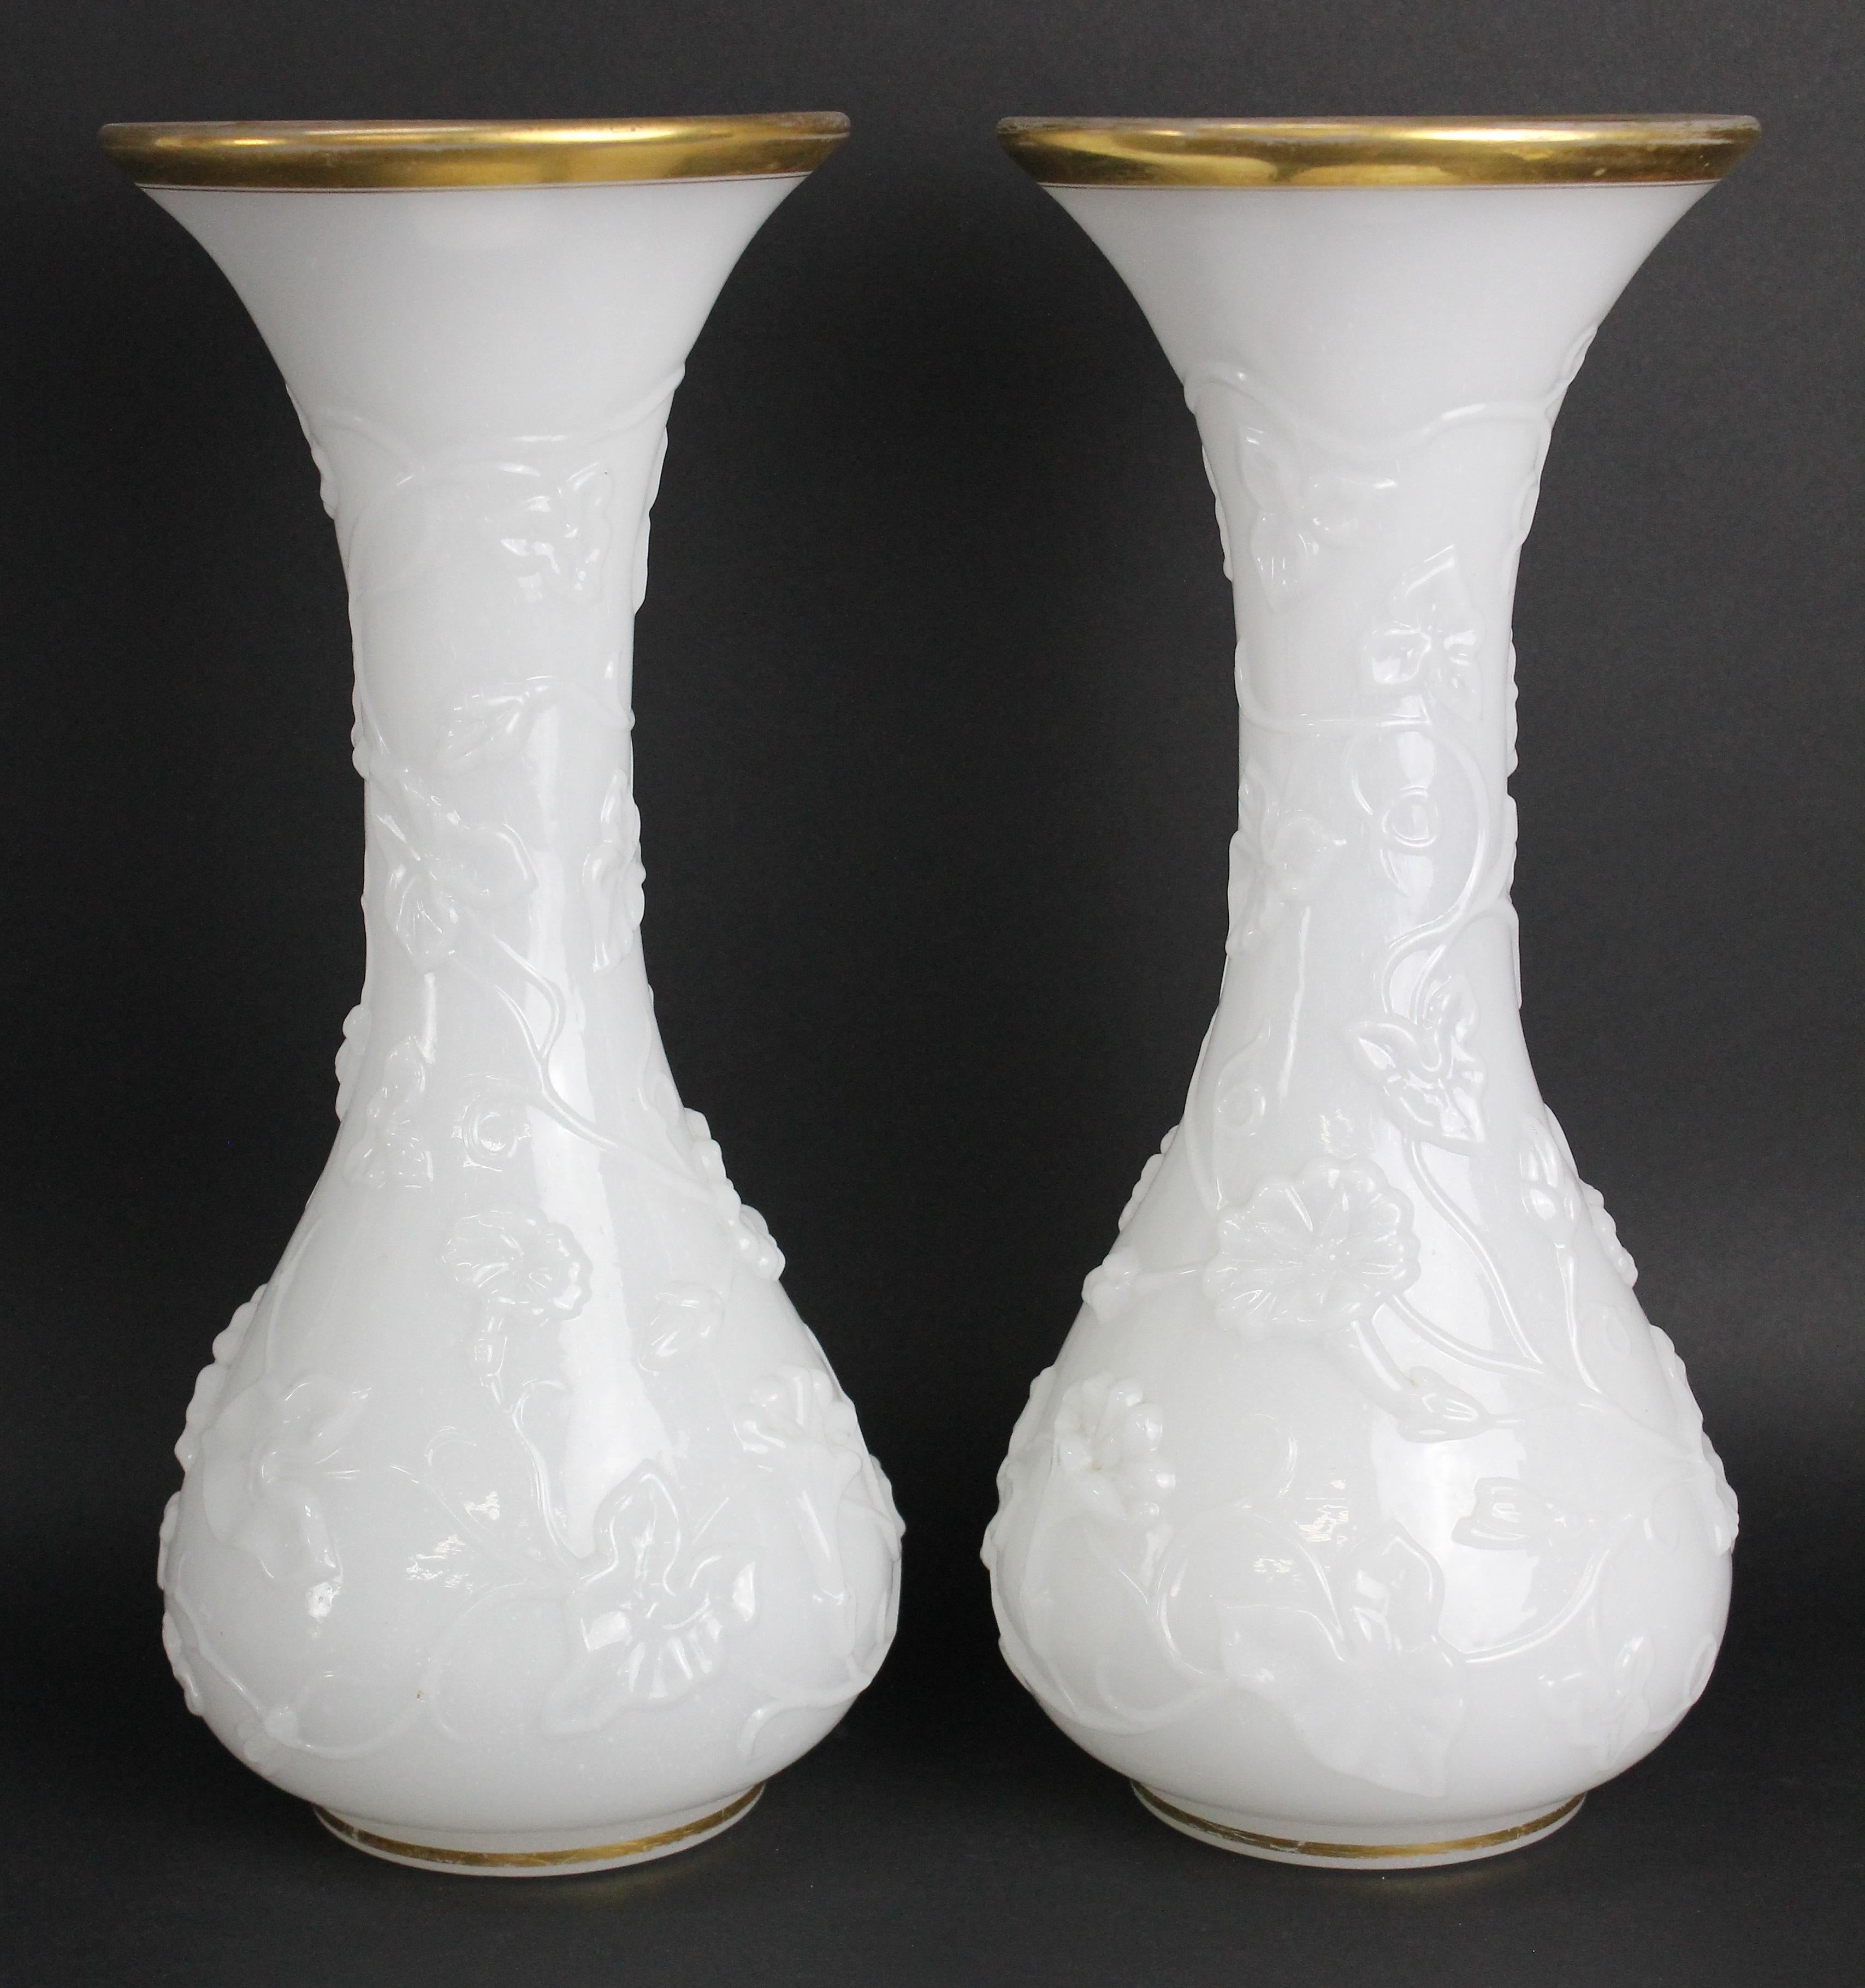 A beautiful pair of antique opaline glass Baccarat vases 